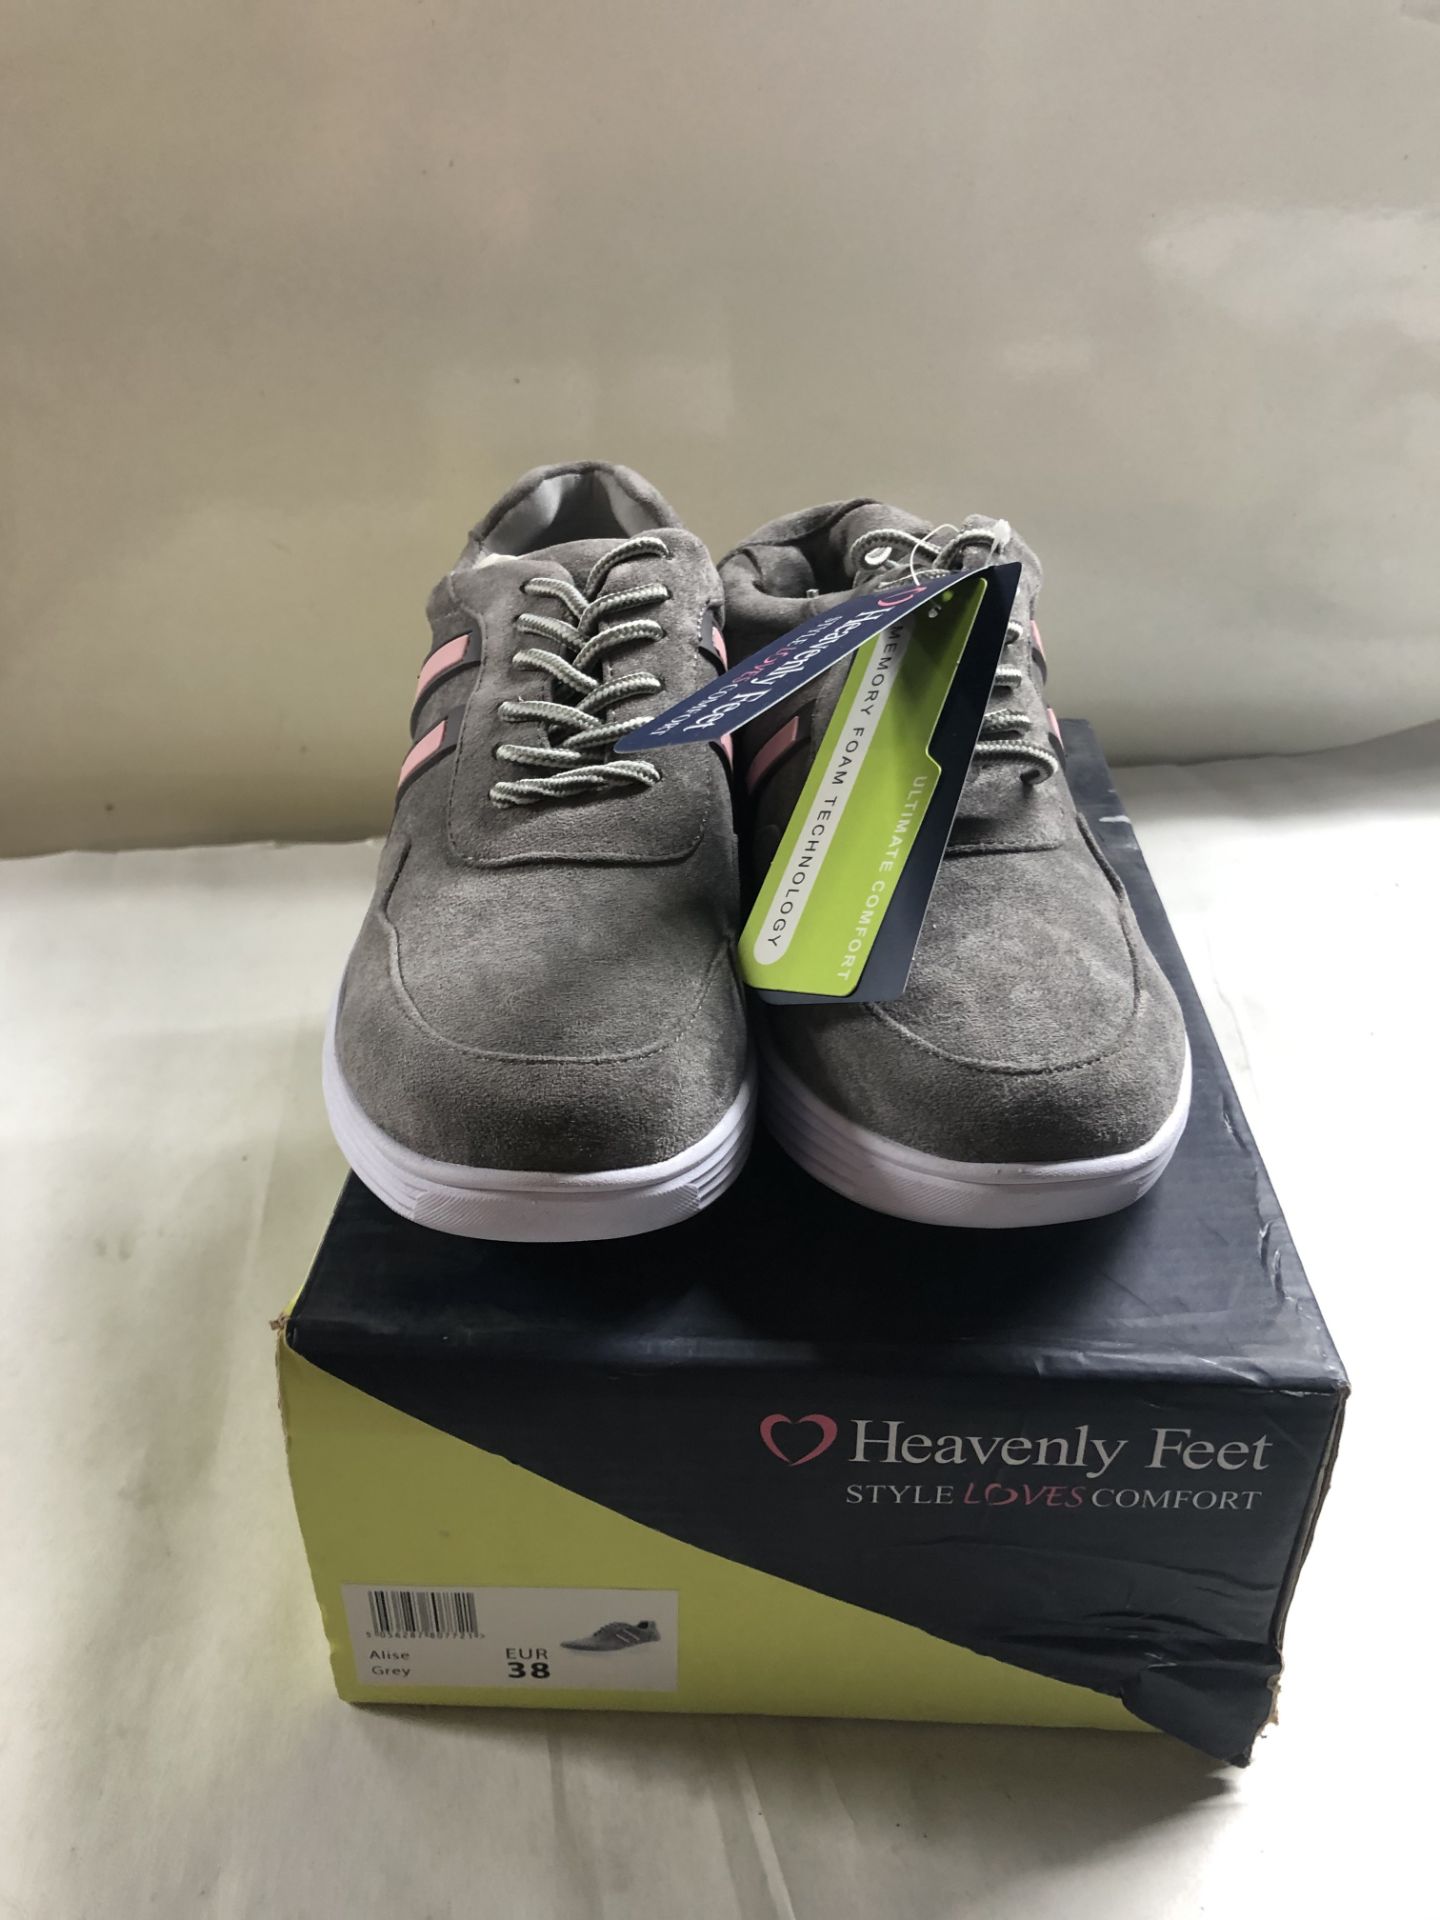 Heavenly Feet Trainers. Eur 38 - Image 2 of 4